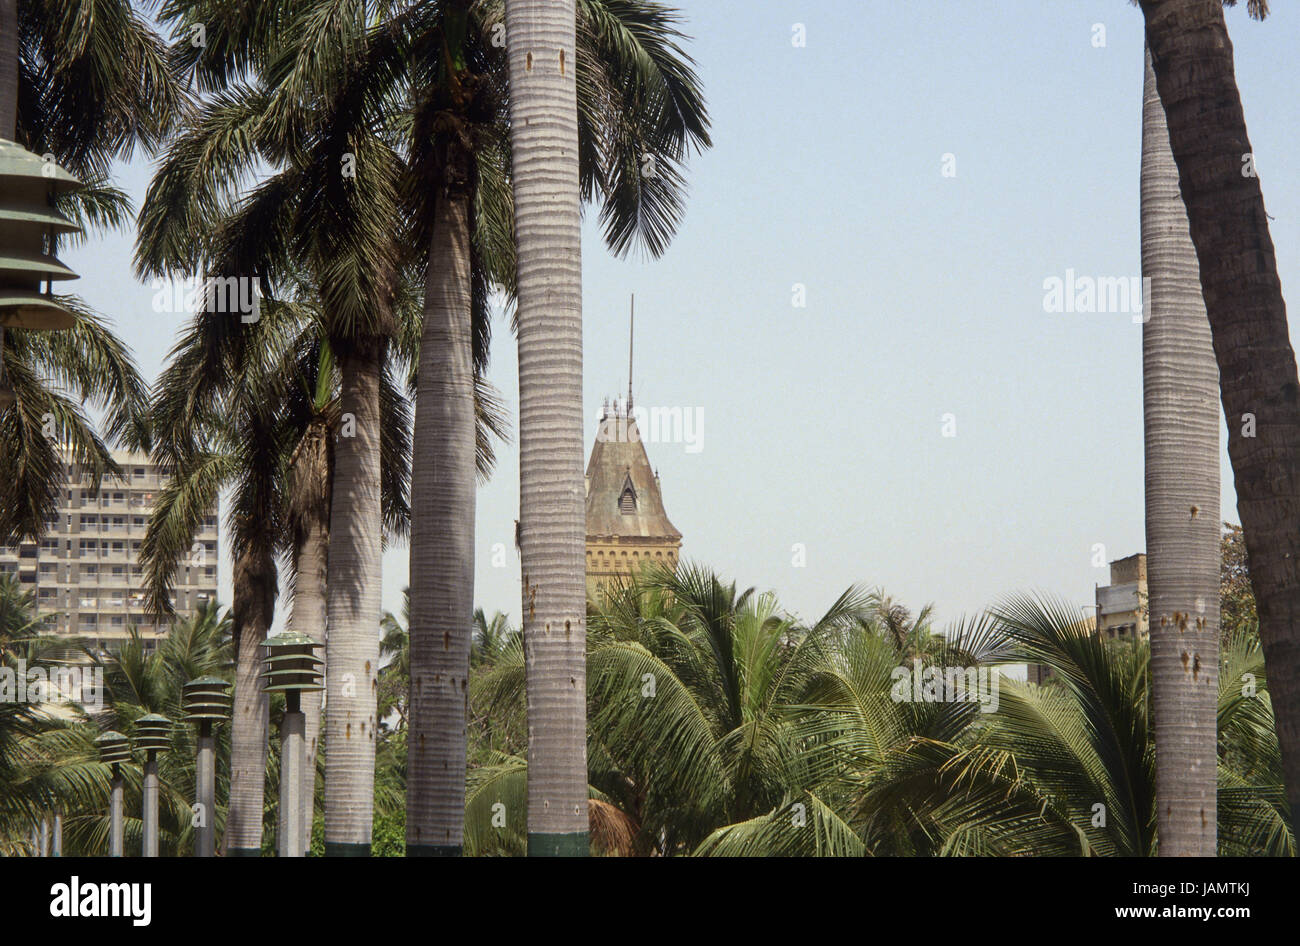 Pakistan,province of Sindh,Karachi,national museum,park,tower,colonial style,palms,detail,Asia,destination,town,city,place of interest,structure,building,architecture,architectural style,strains,plants,outside, Stock Photo